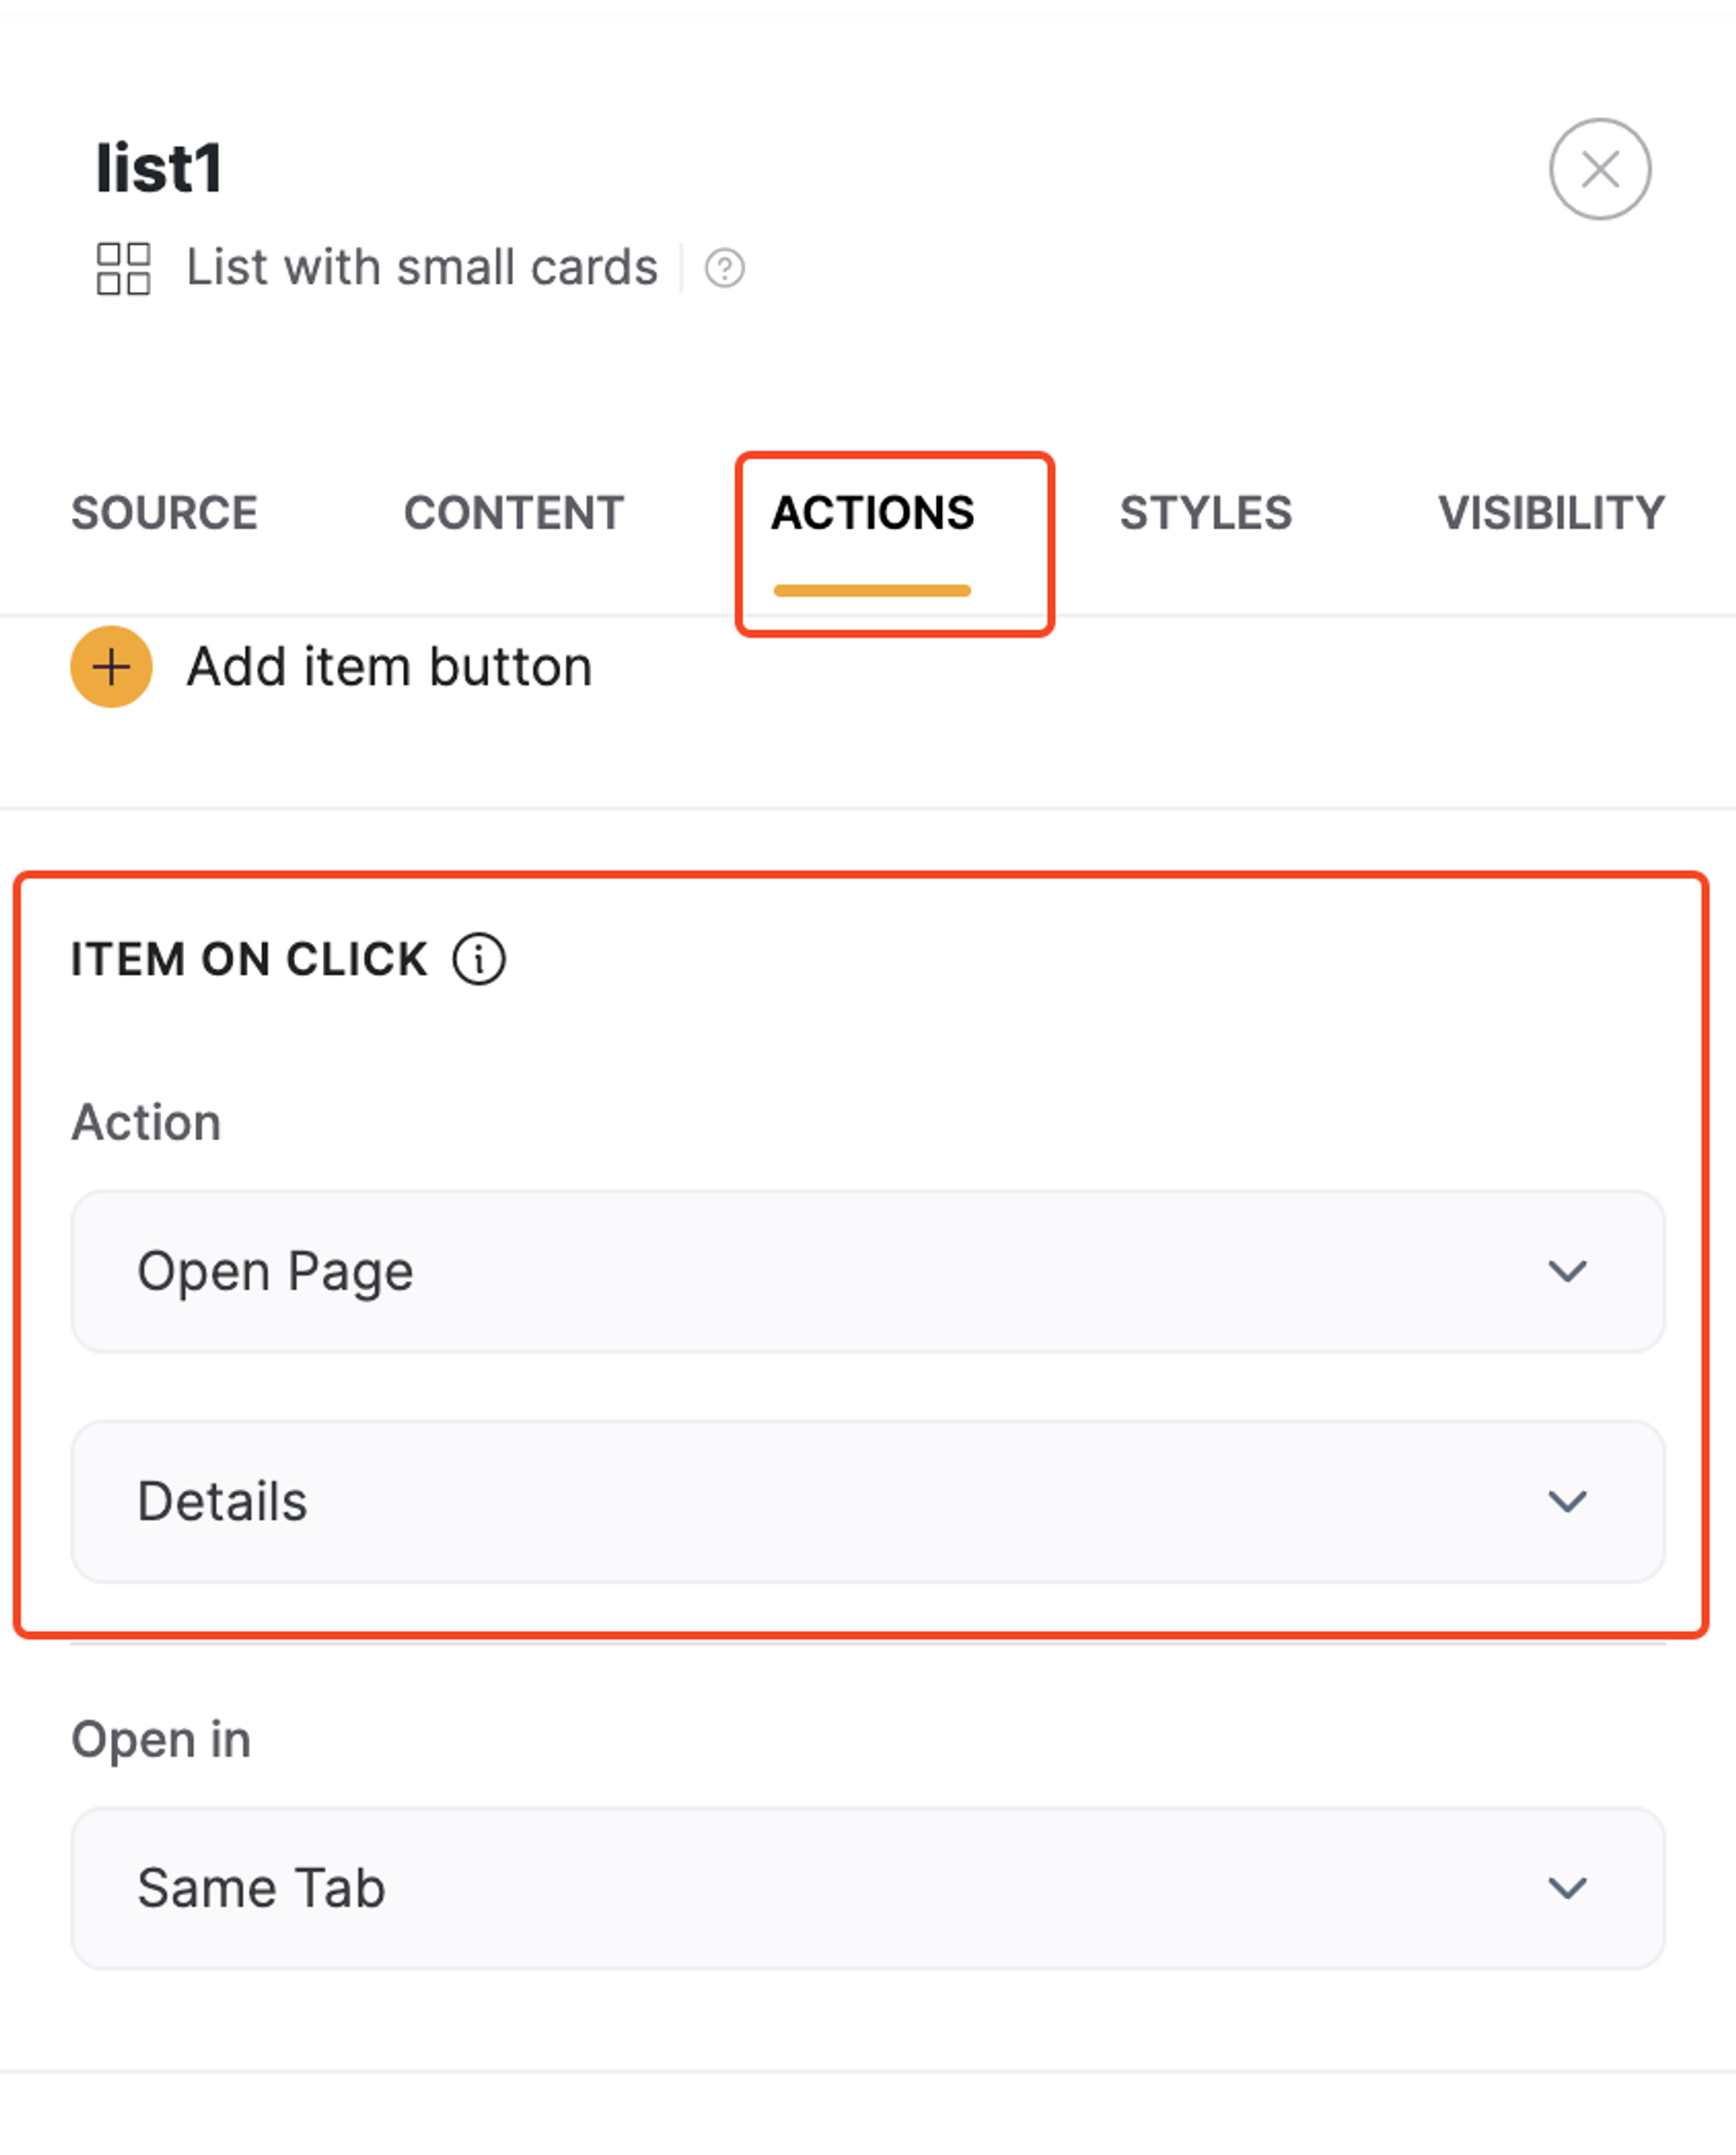 Setting "Open Page" to the list details page